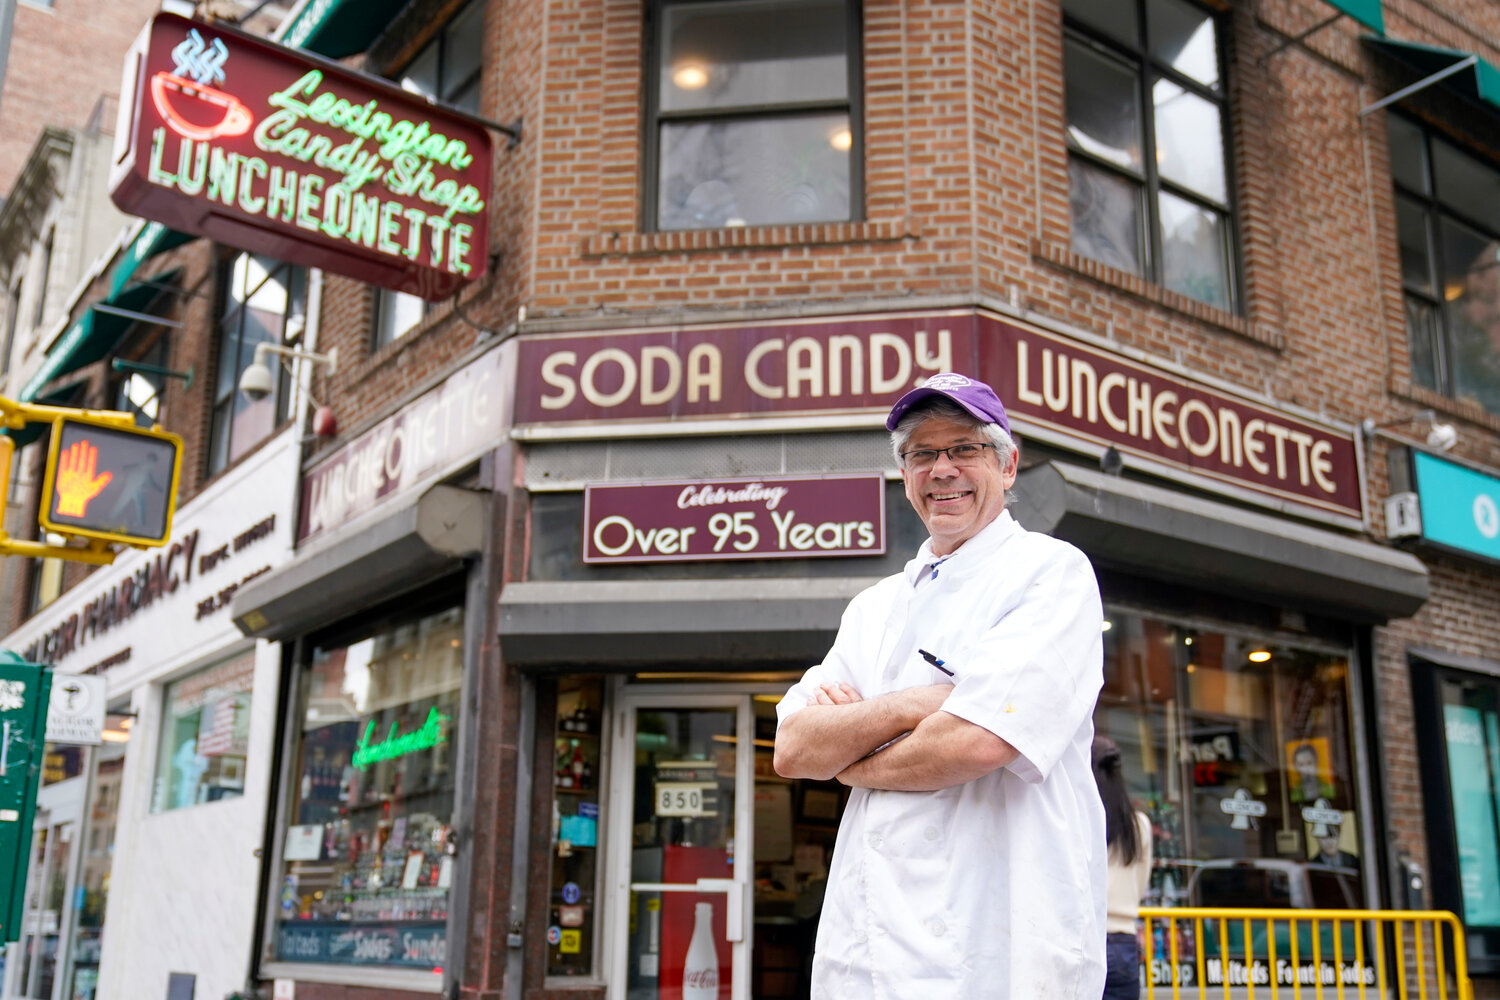 John Philis, a co-owner of the Lexington Candy Shop, outside the Manhattan luncheonette last month. The old school business met the new world when Nicolas Heller, a TikToker and Instagrammer with 1.2 million followers, popped in for a traditional Coke float. Naturally, he made a video. It went viral, garnering 4.8 million likes.